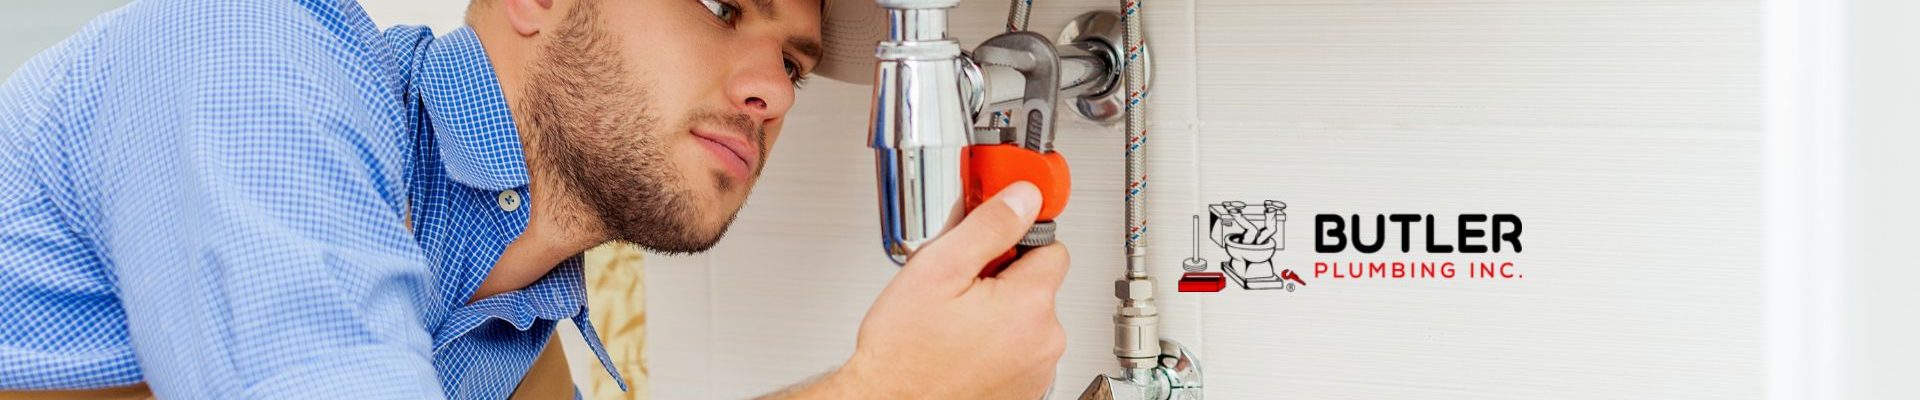 Why Tipping Plumbers Is Controversial (1)